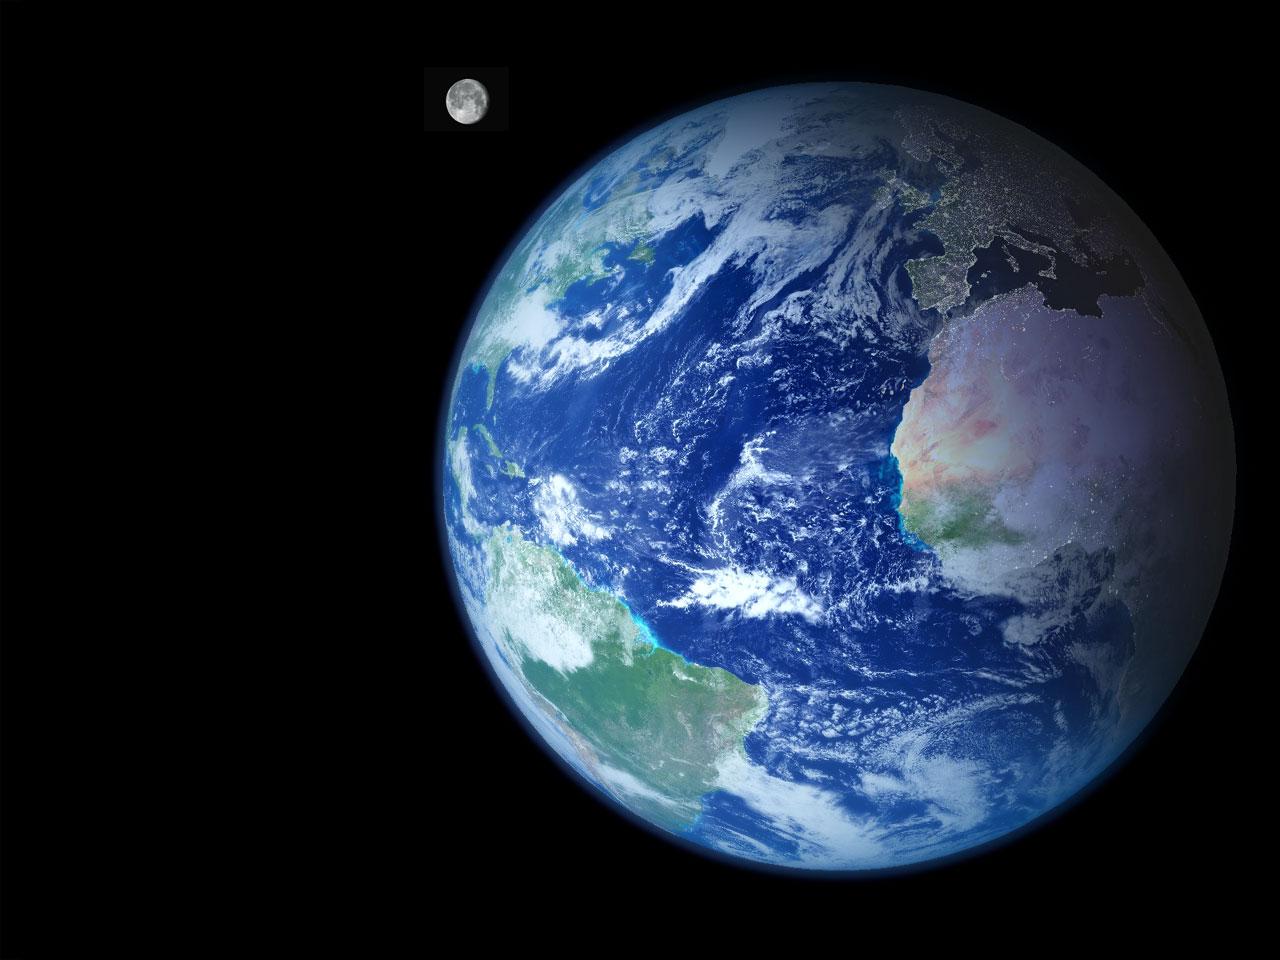 Planet Earth Wallpaper Hd 3212 Hd Wallpapers in Space   Imagescicom